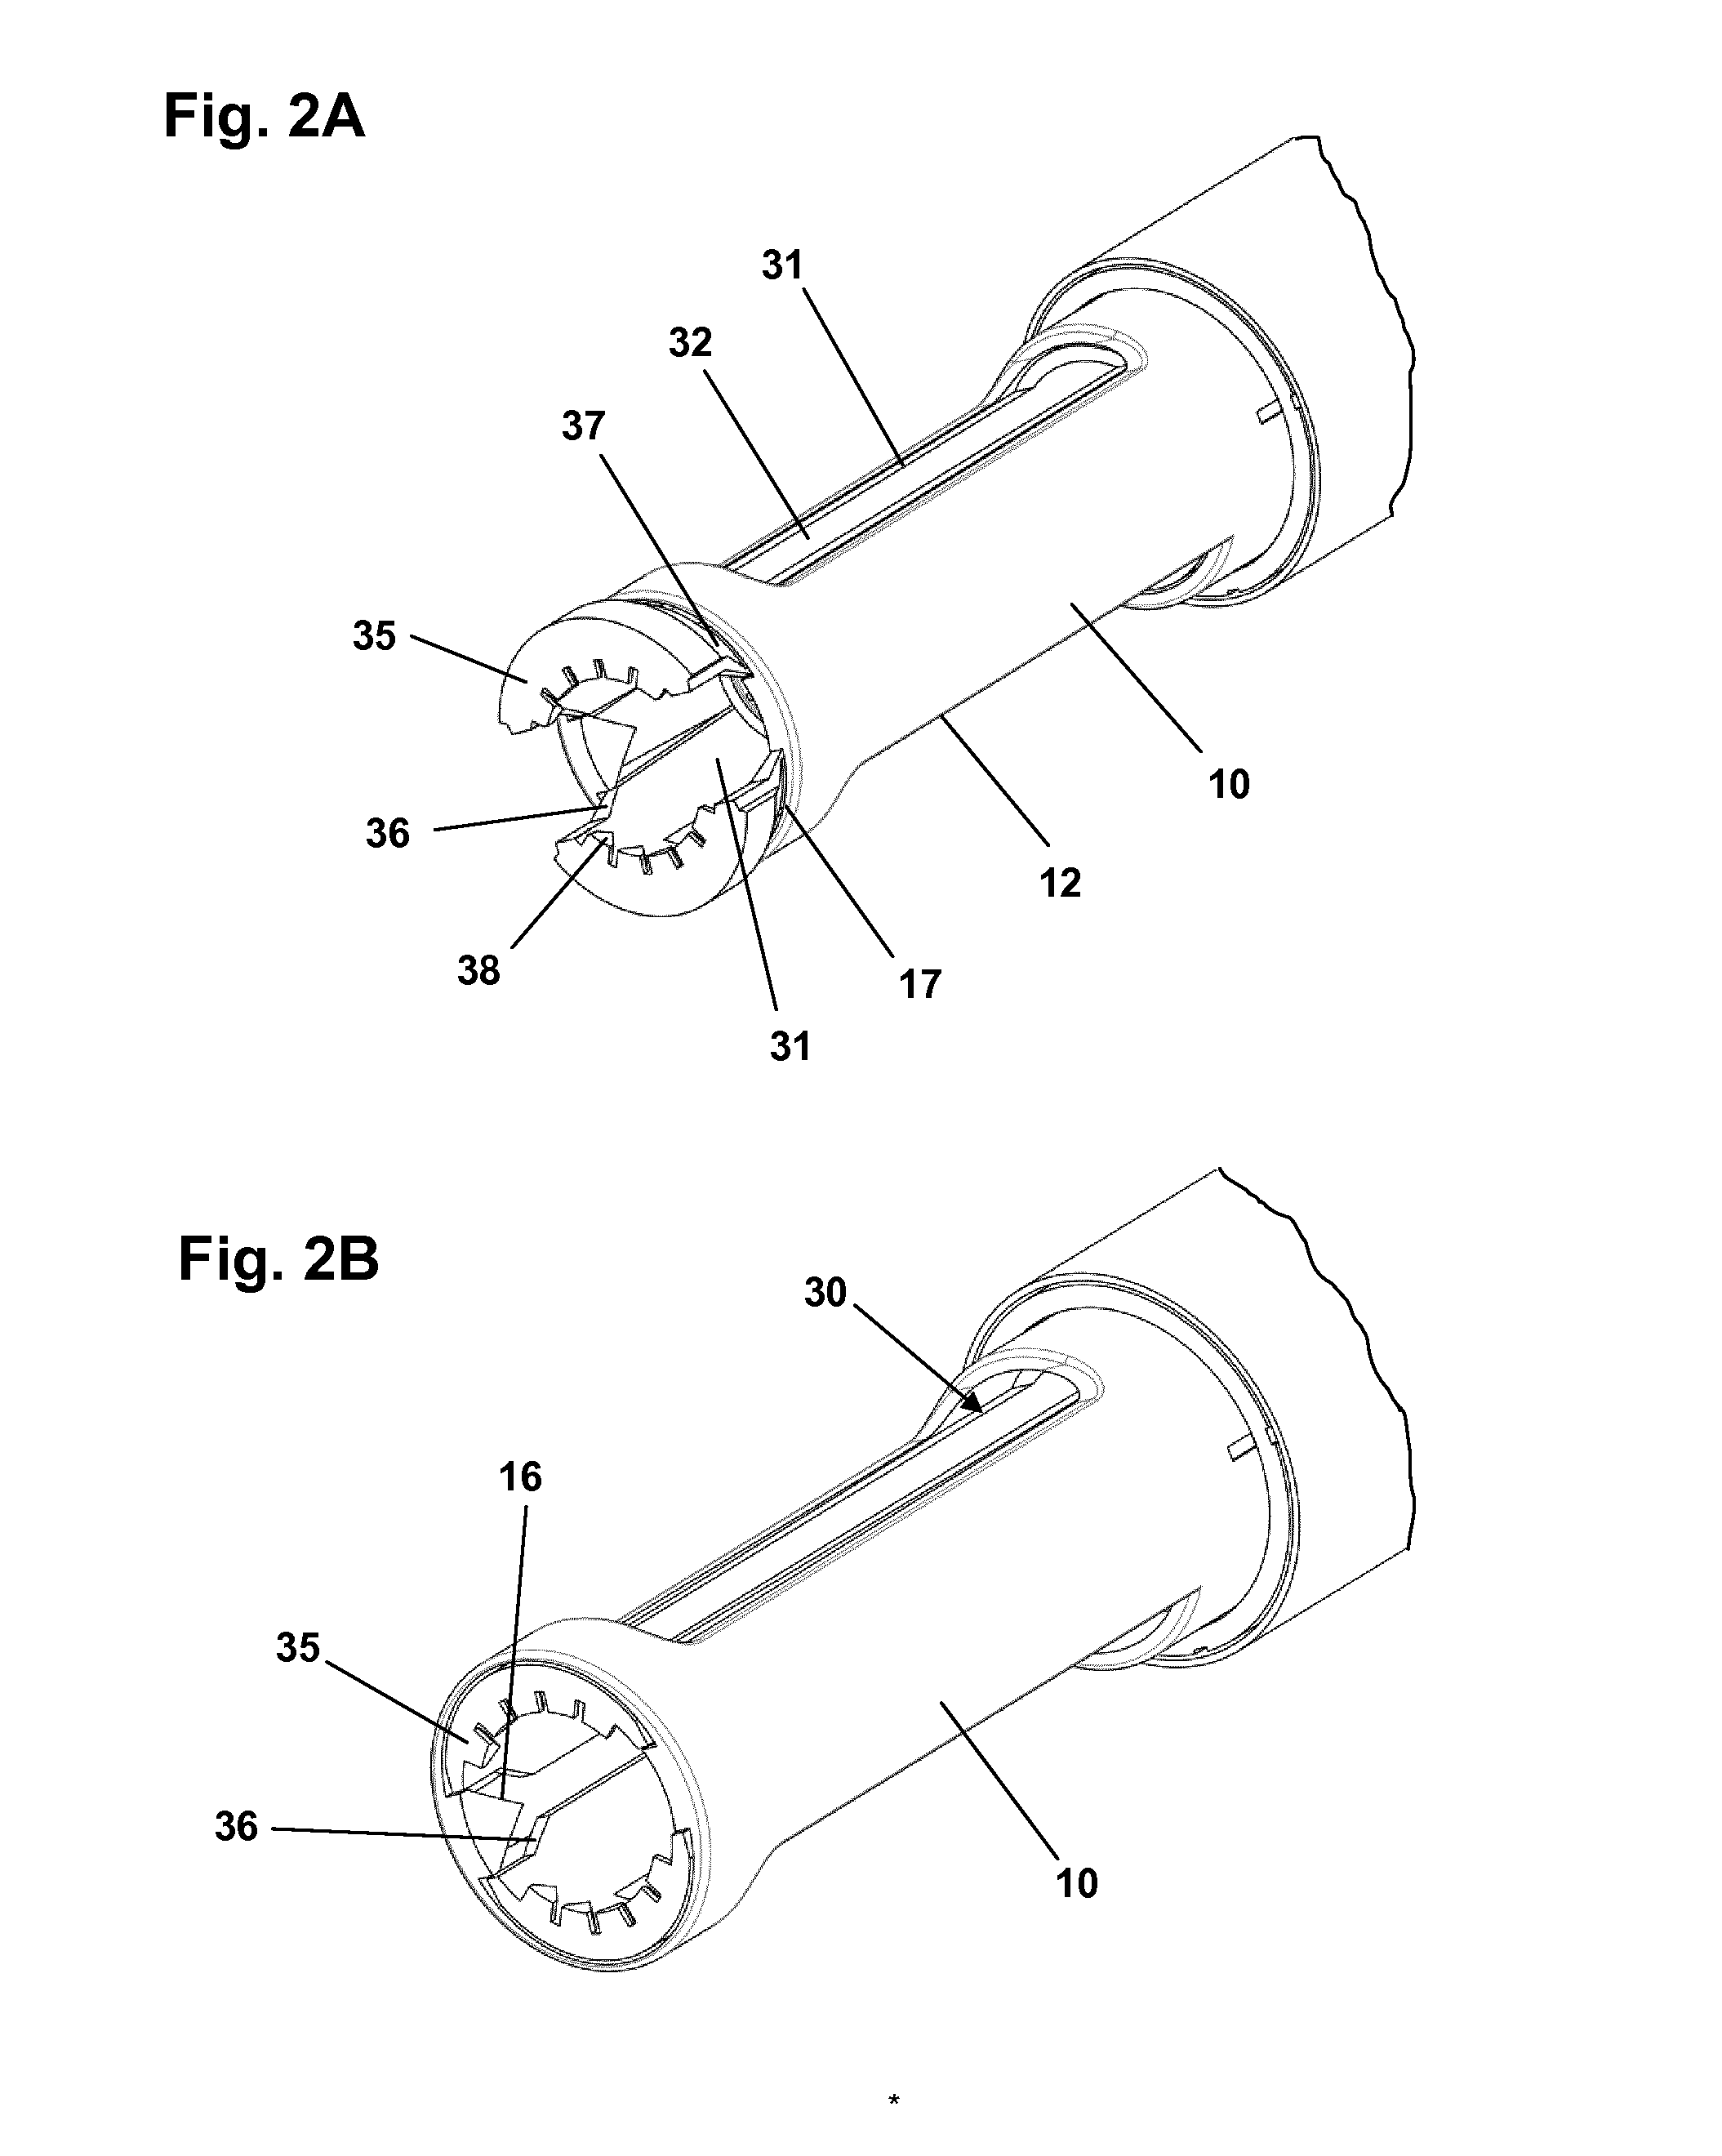 Drug Delivery Device with Front Loading Feature